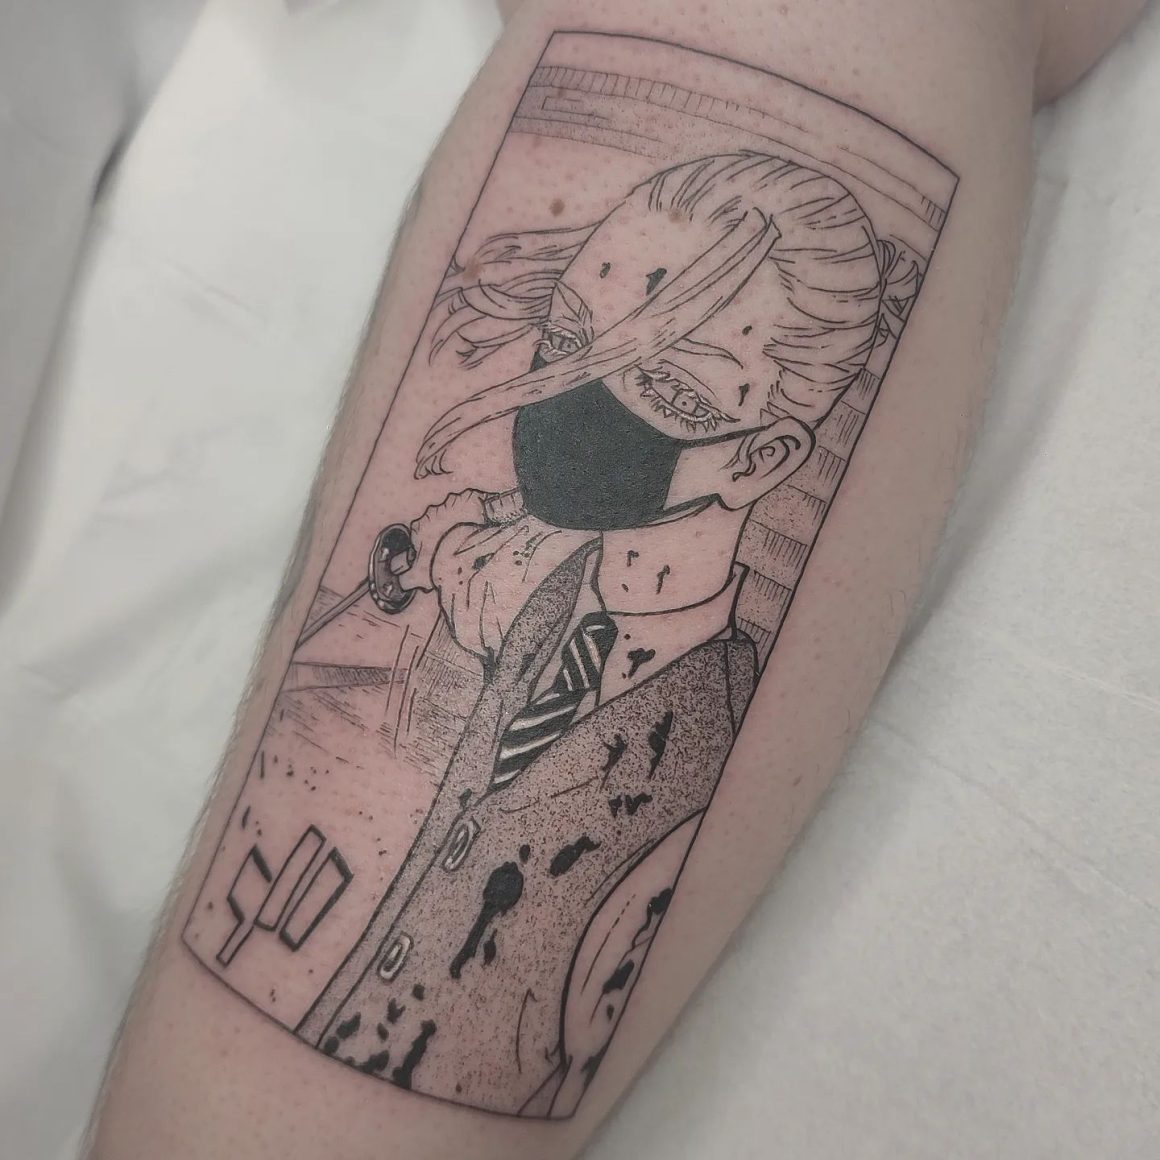 Tokyo Revengers Tattoos: Wear Your Fandom with Pride